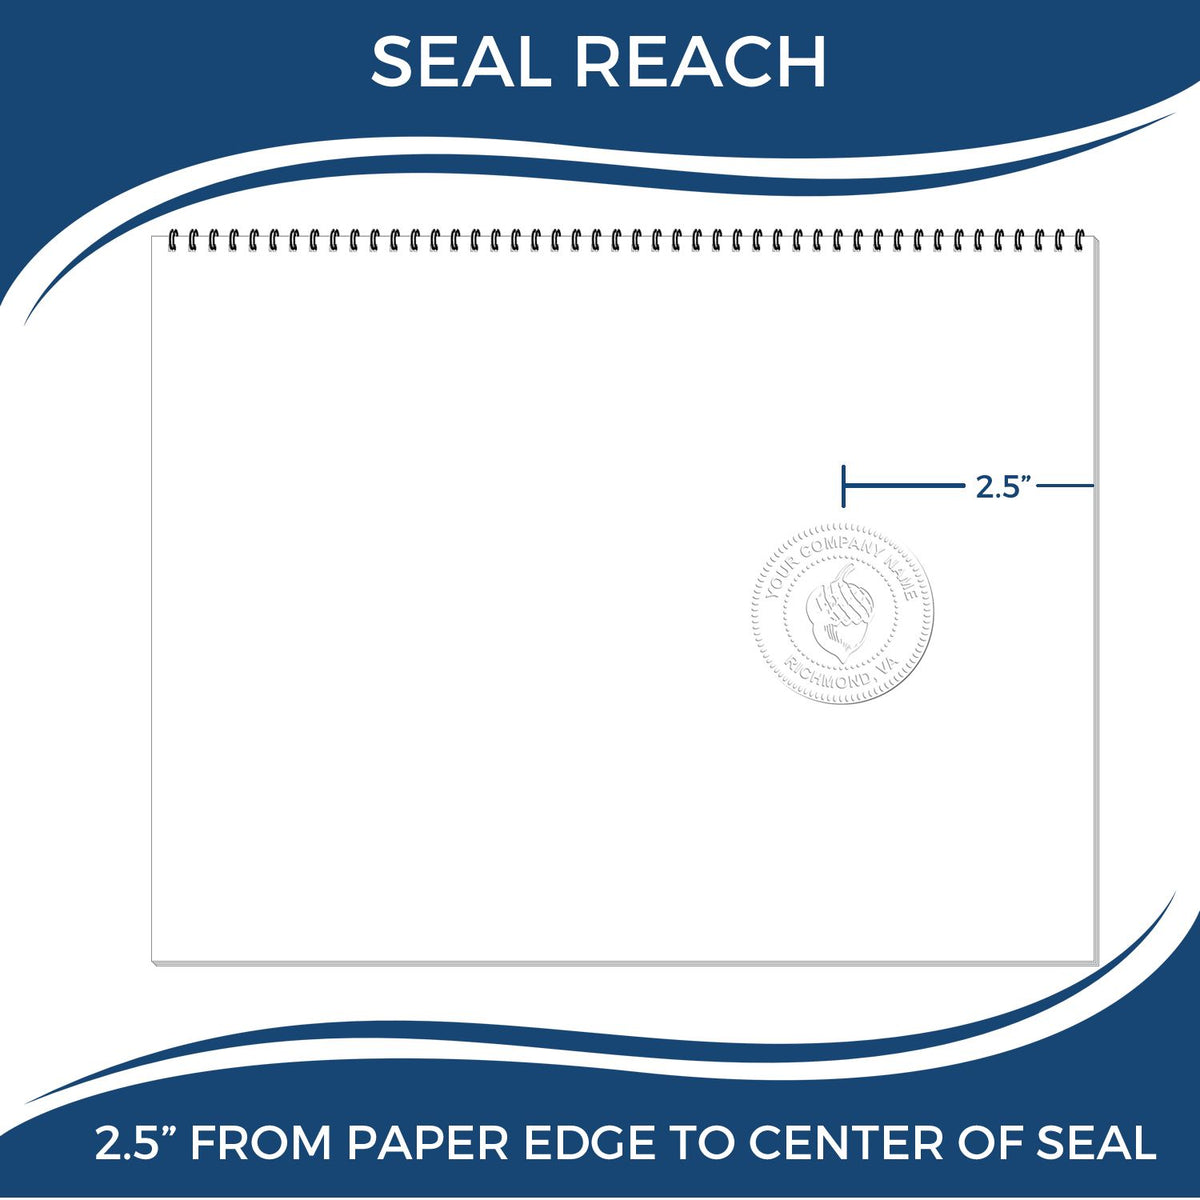 An infographic showing the seal reach which is represented by a ruler and a miniature seal image of the Long Reach Utah PE Seal